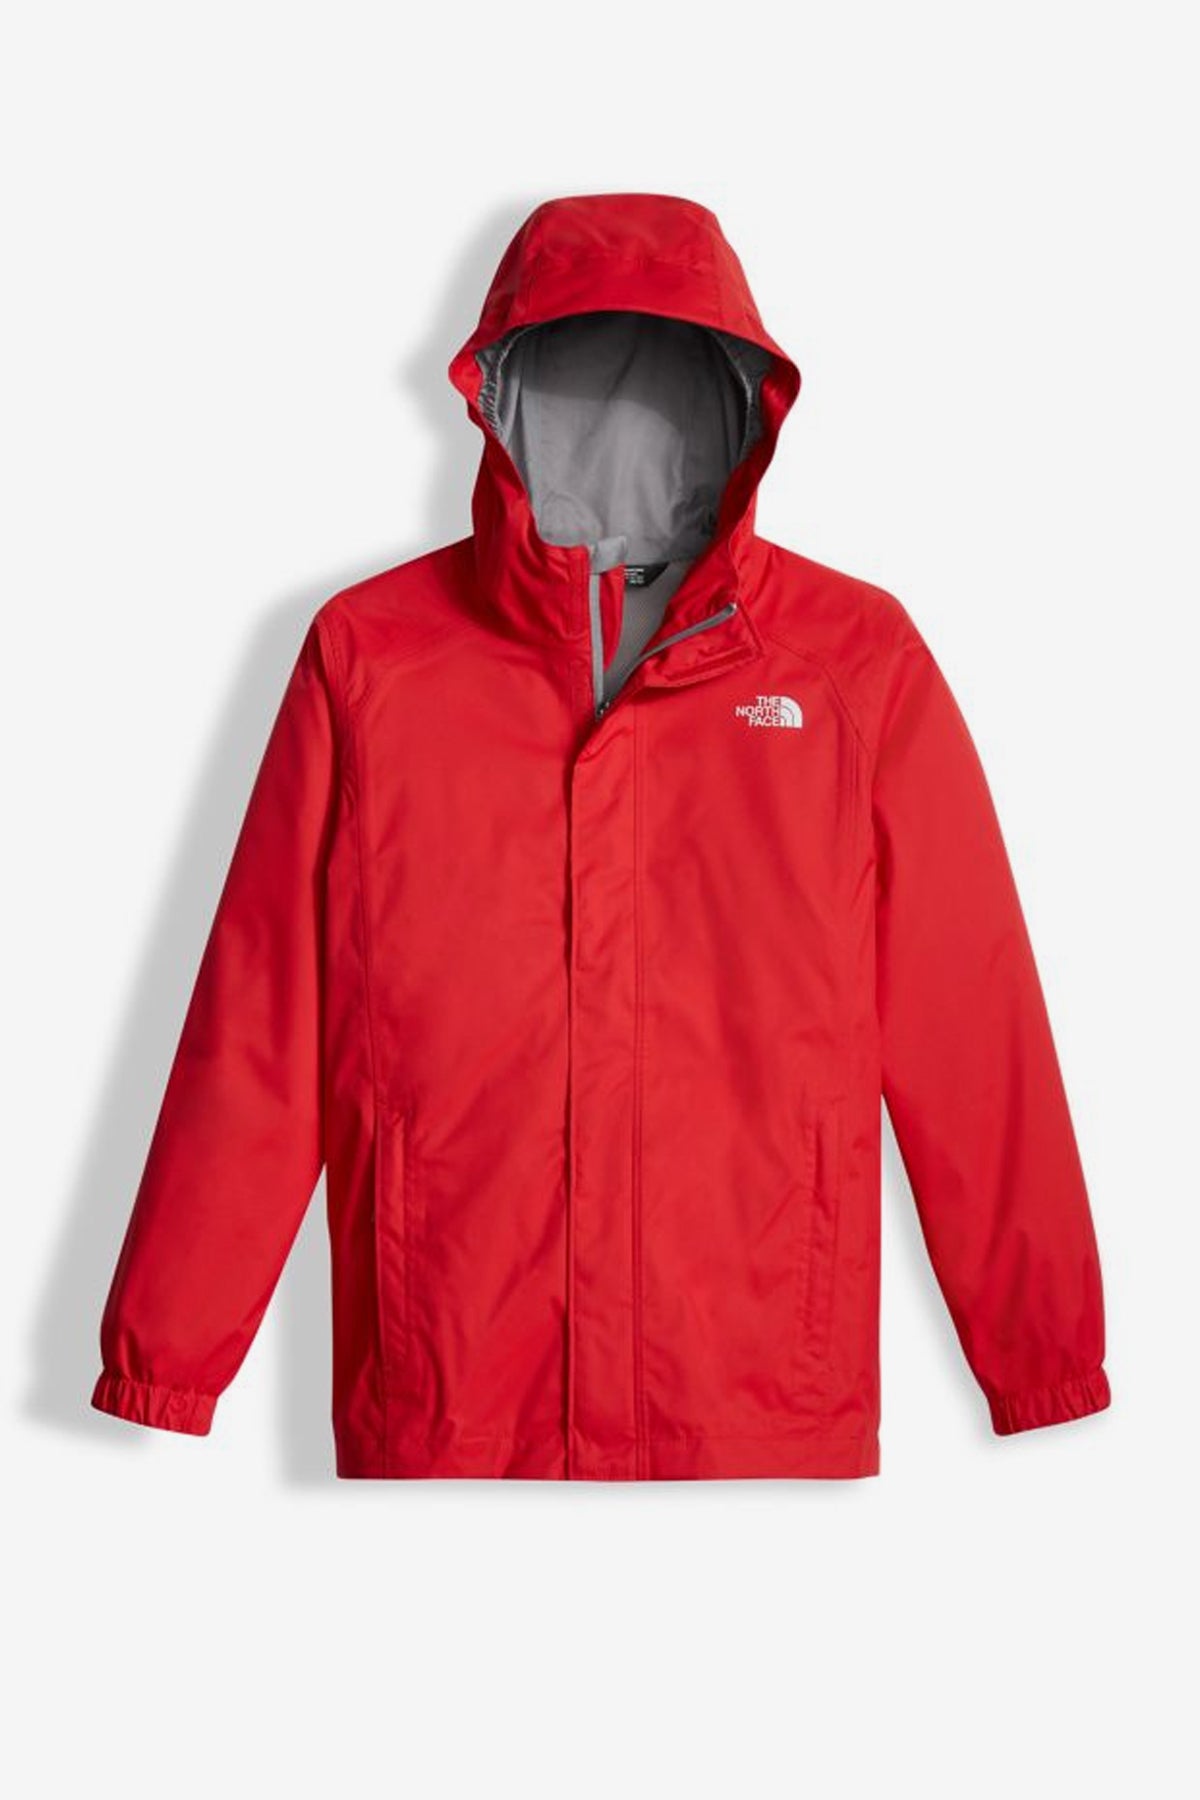 north face red jacket Online shopping 